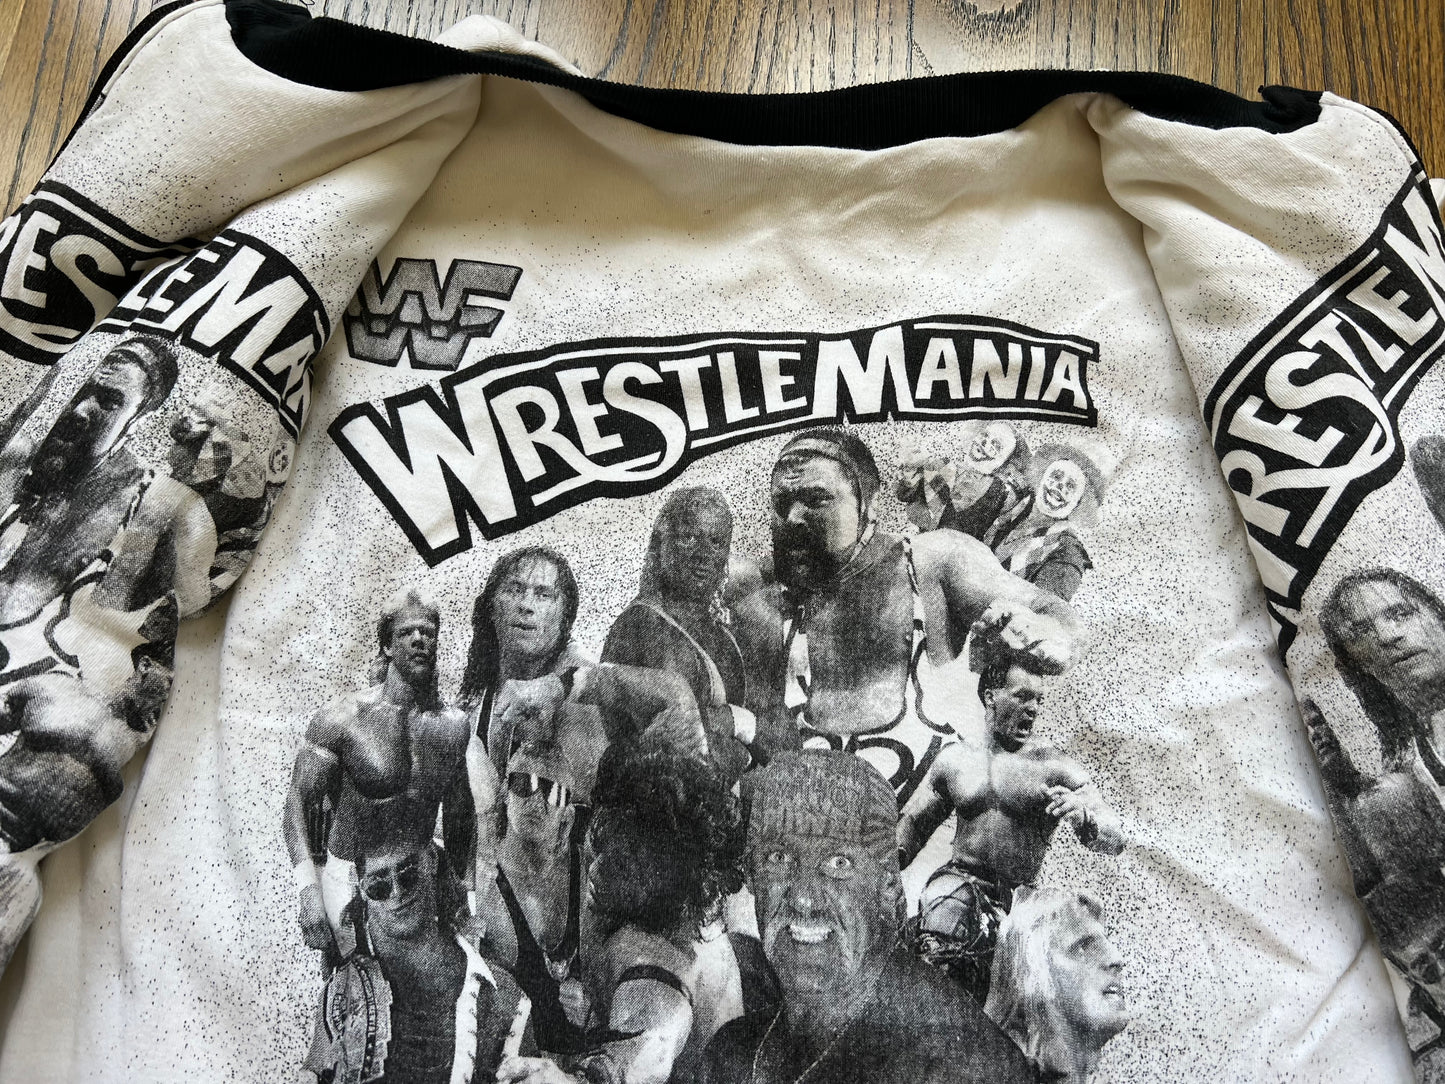 1994 WWF “Wrestlemania” inside and out print vest